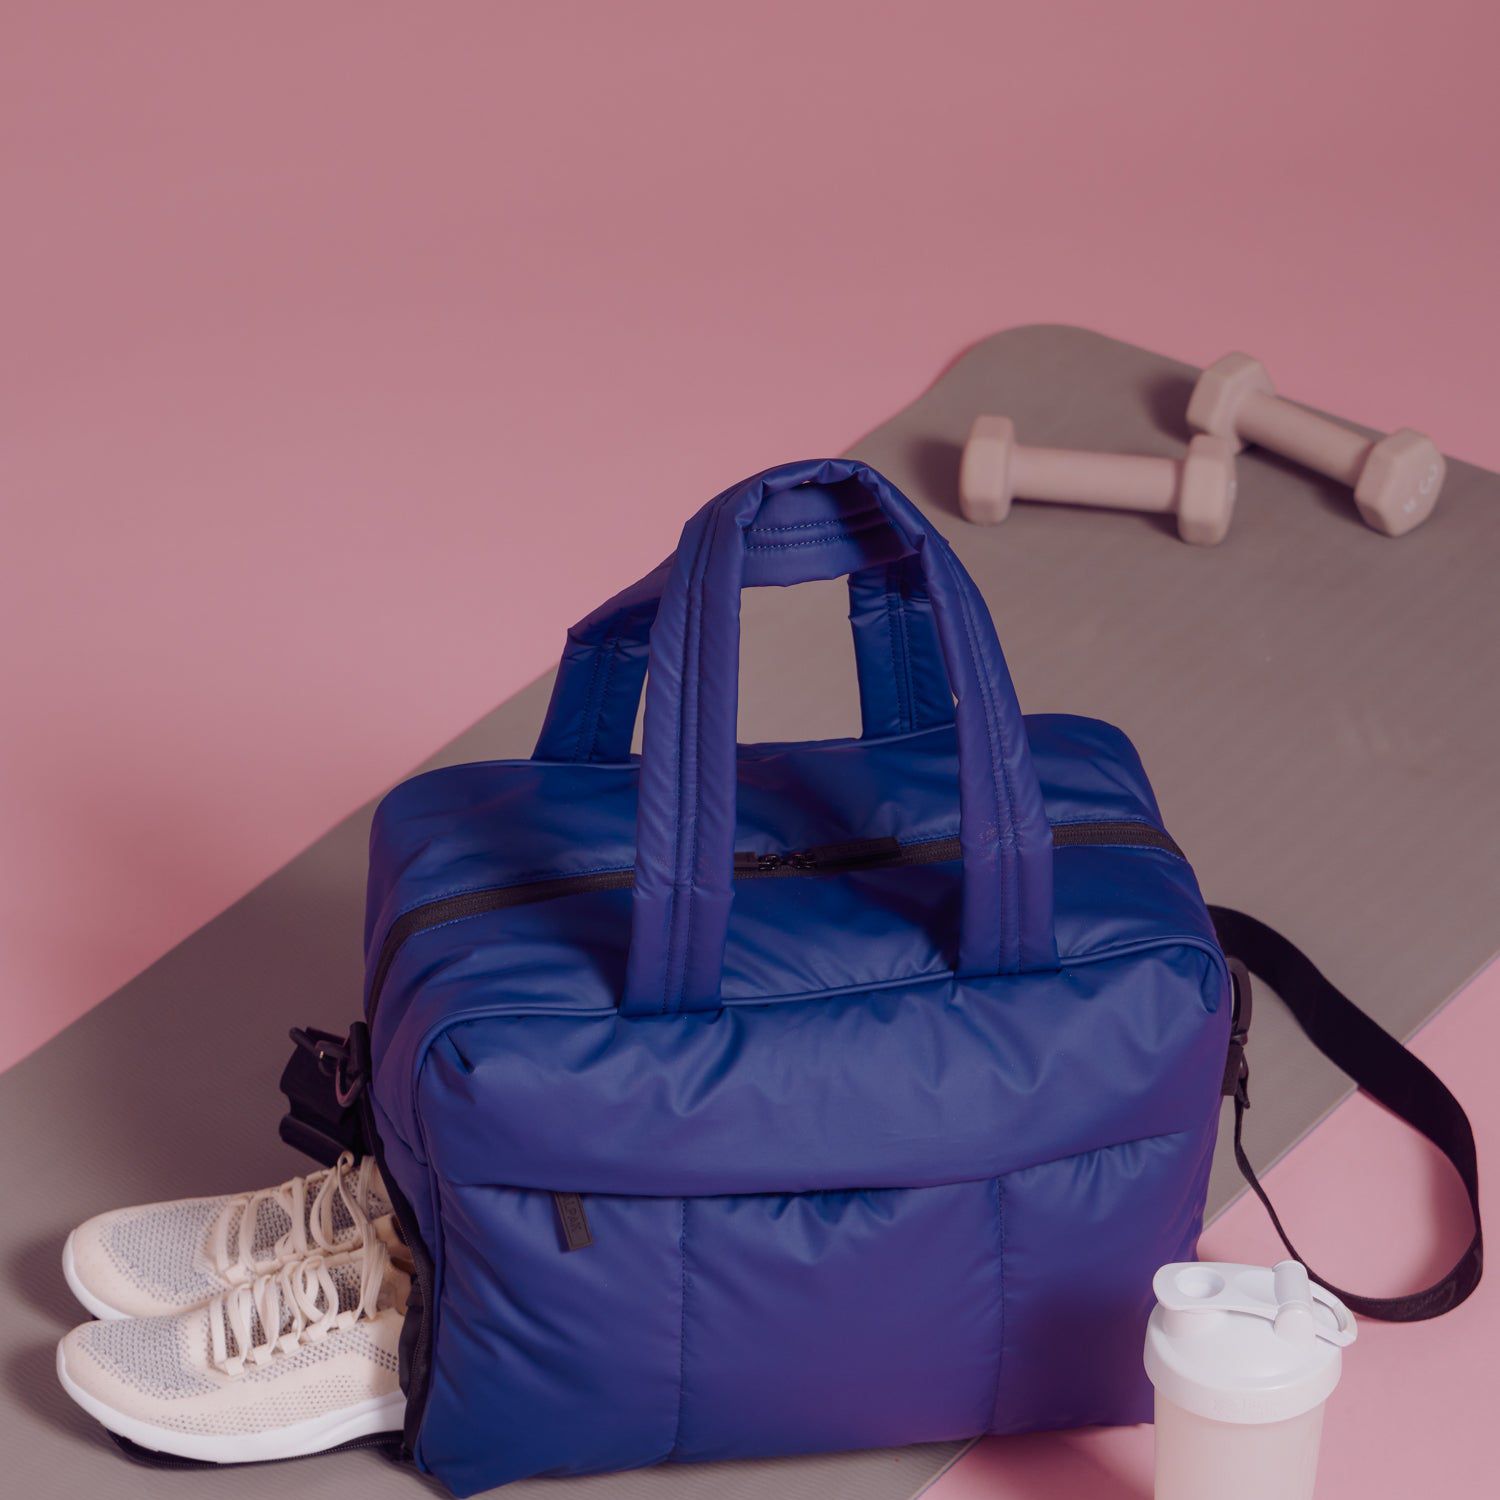 Get a Grip on Your Grind with the Best Gym Bags for Women